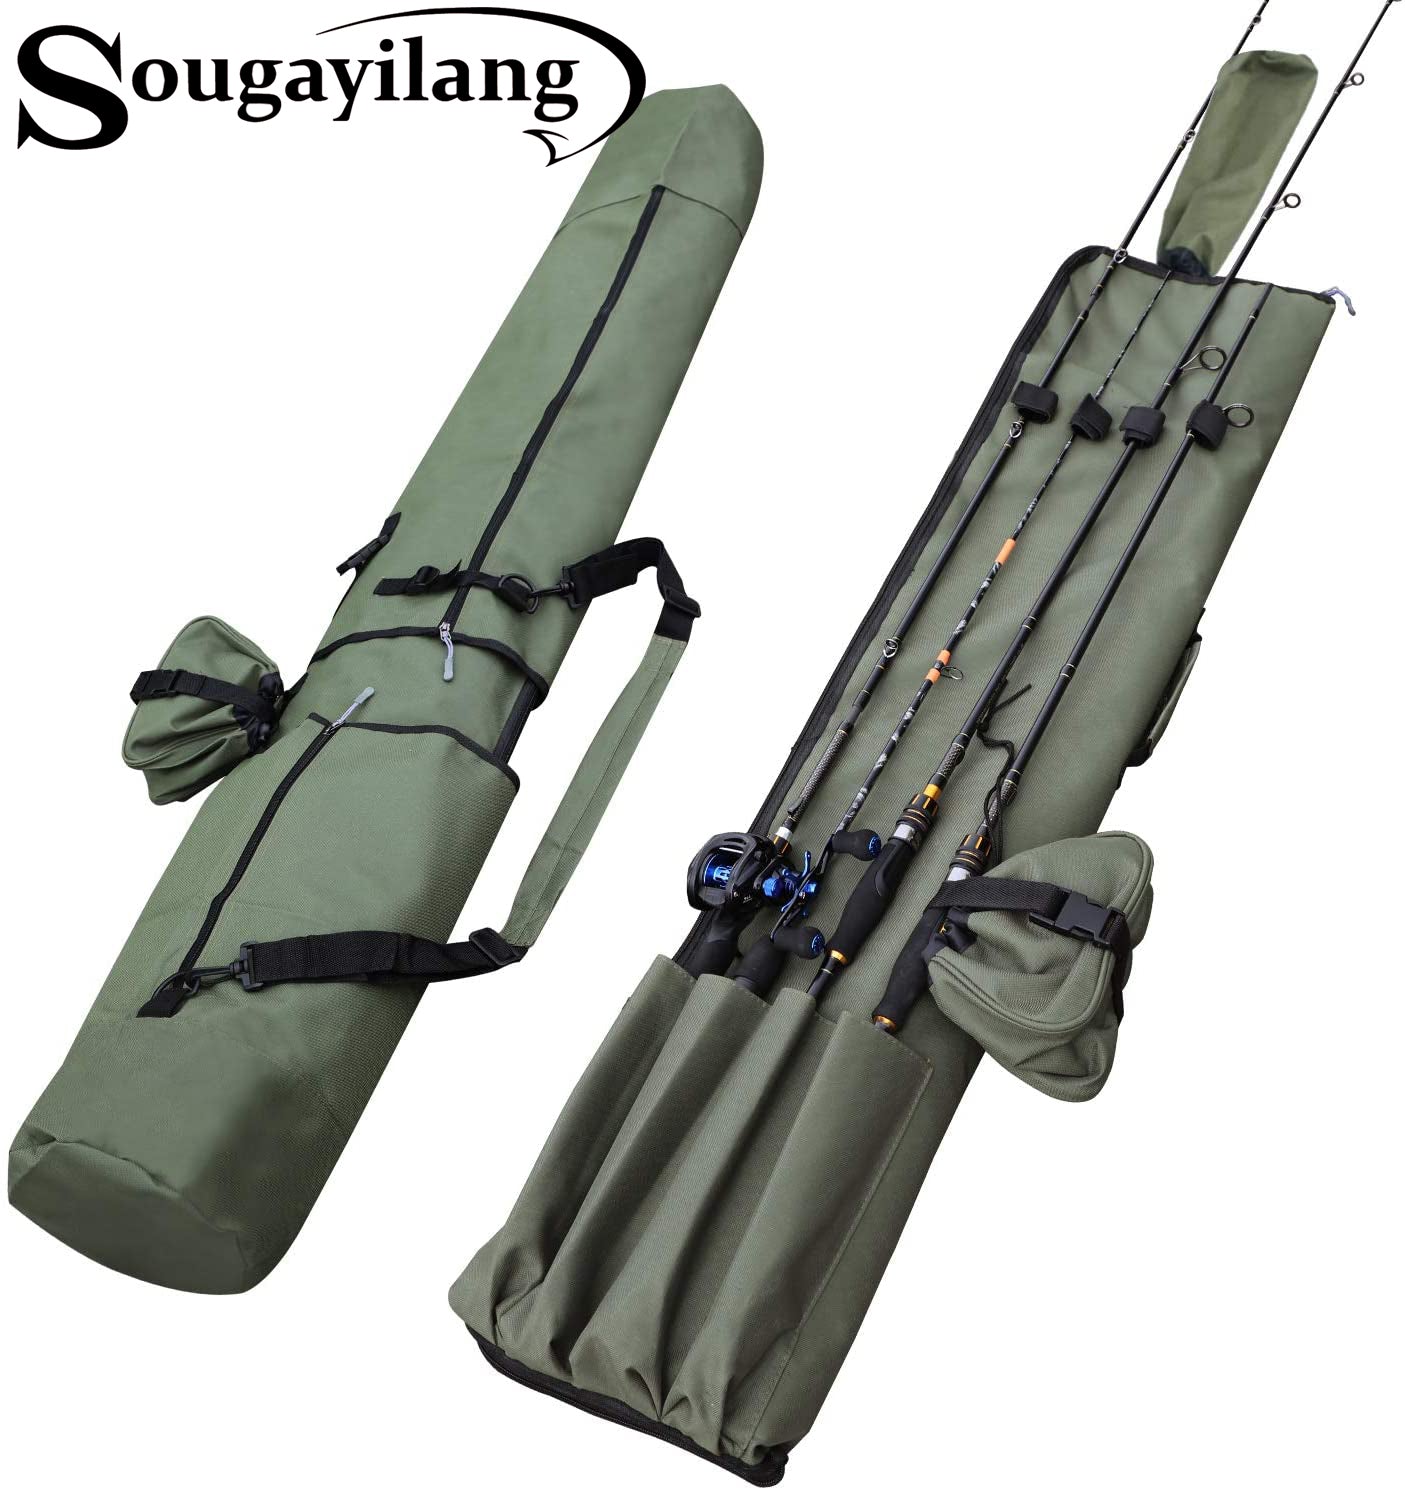 Sougayilang Fishing Rod Bag Canvas Rod Case Organizer Pole Storage Bag  Fishing Rod and Reel Carrier Organizer for Travel, Gift for Father,  Boyfriend and Family